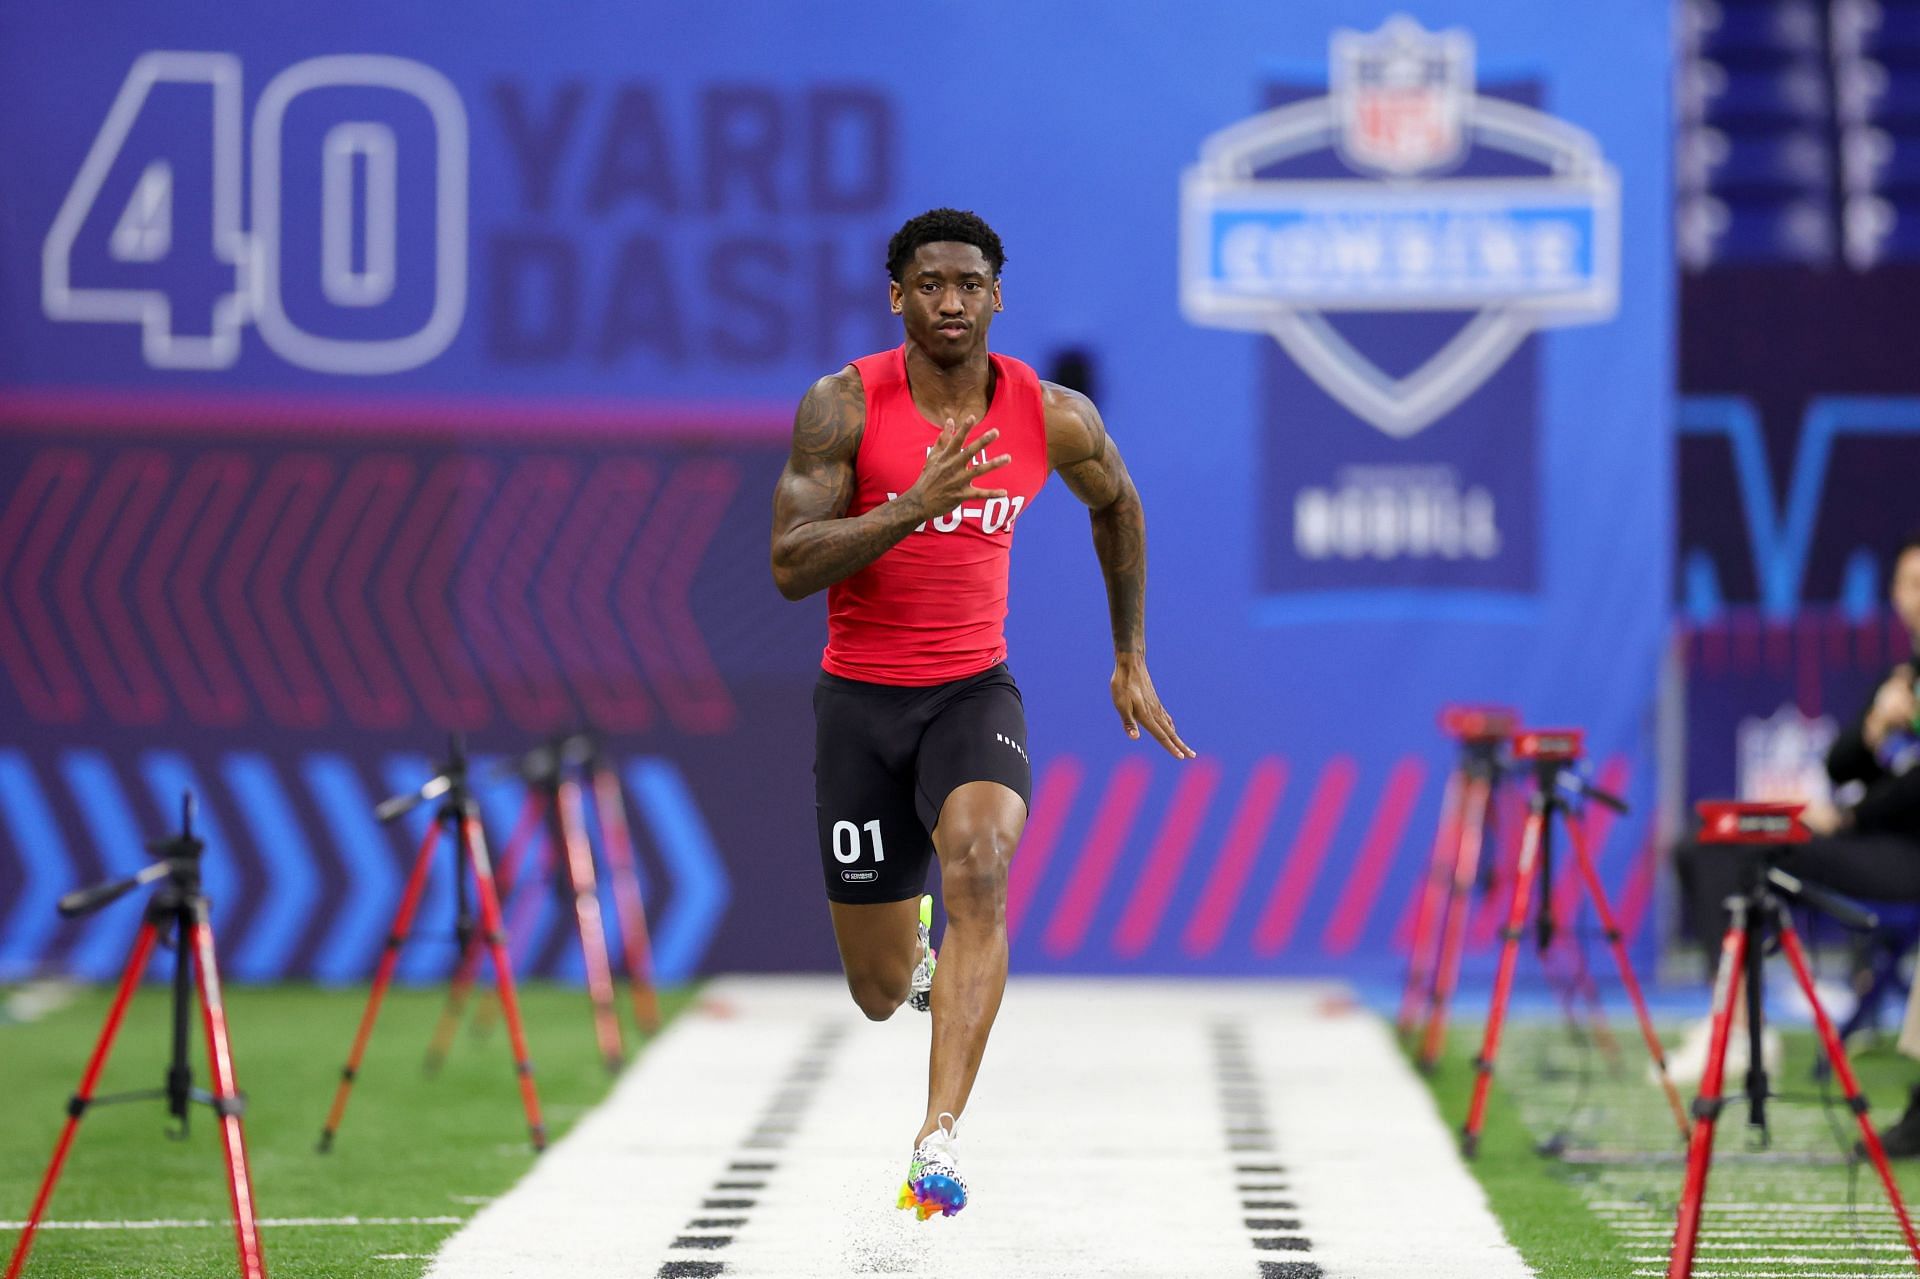 Addison at the NFL Combine